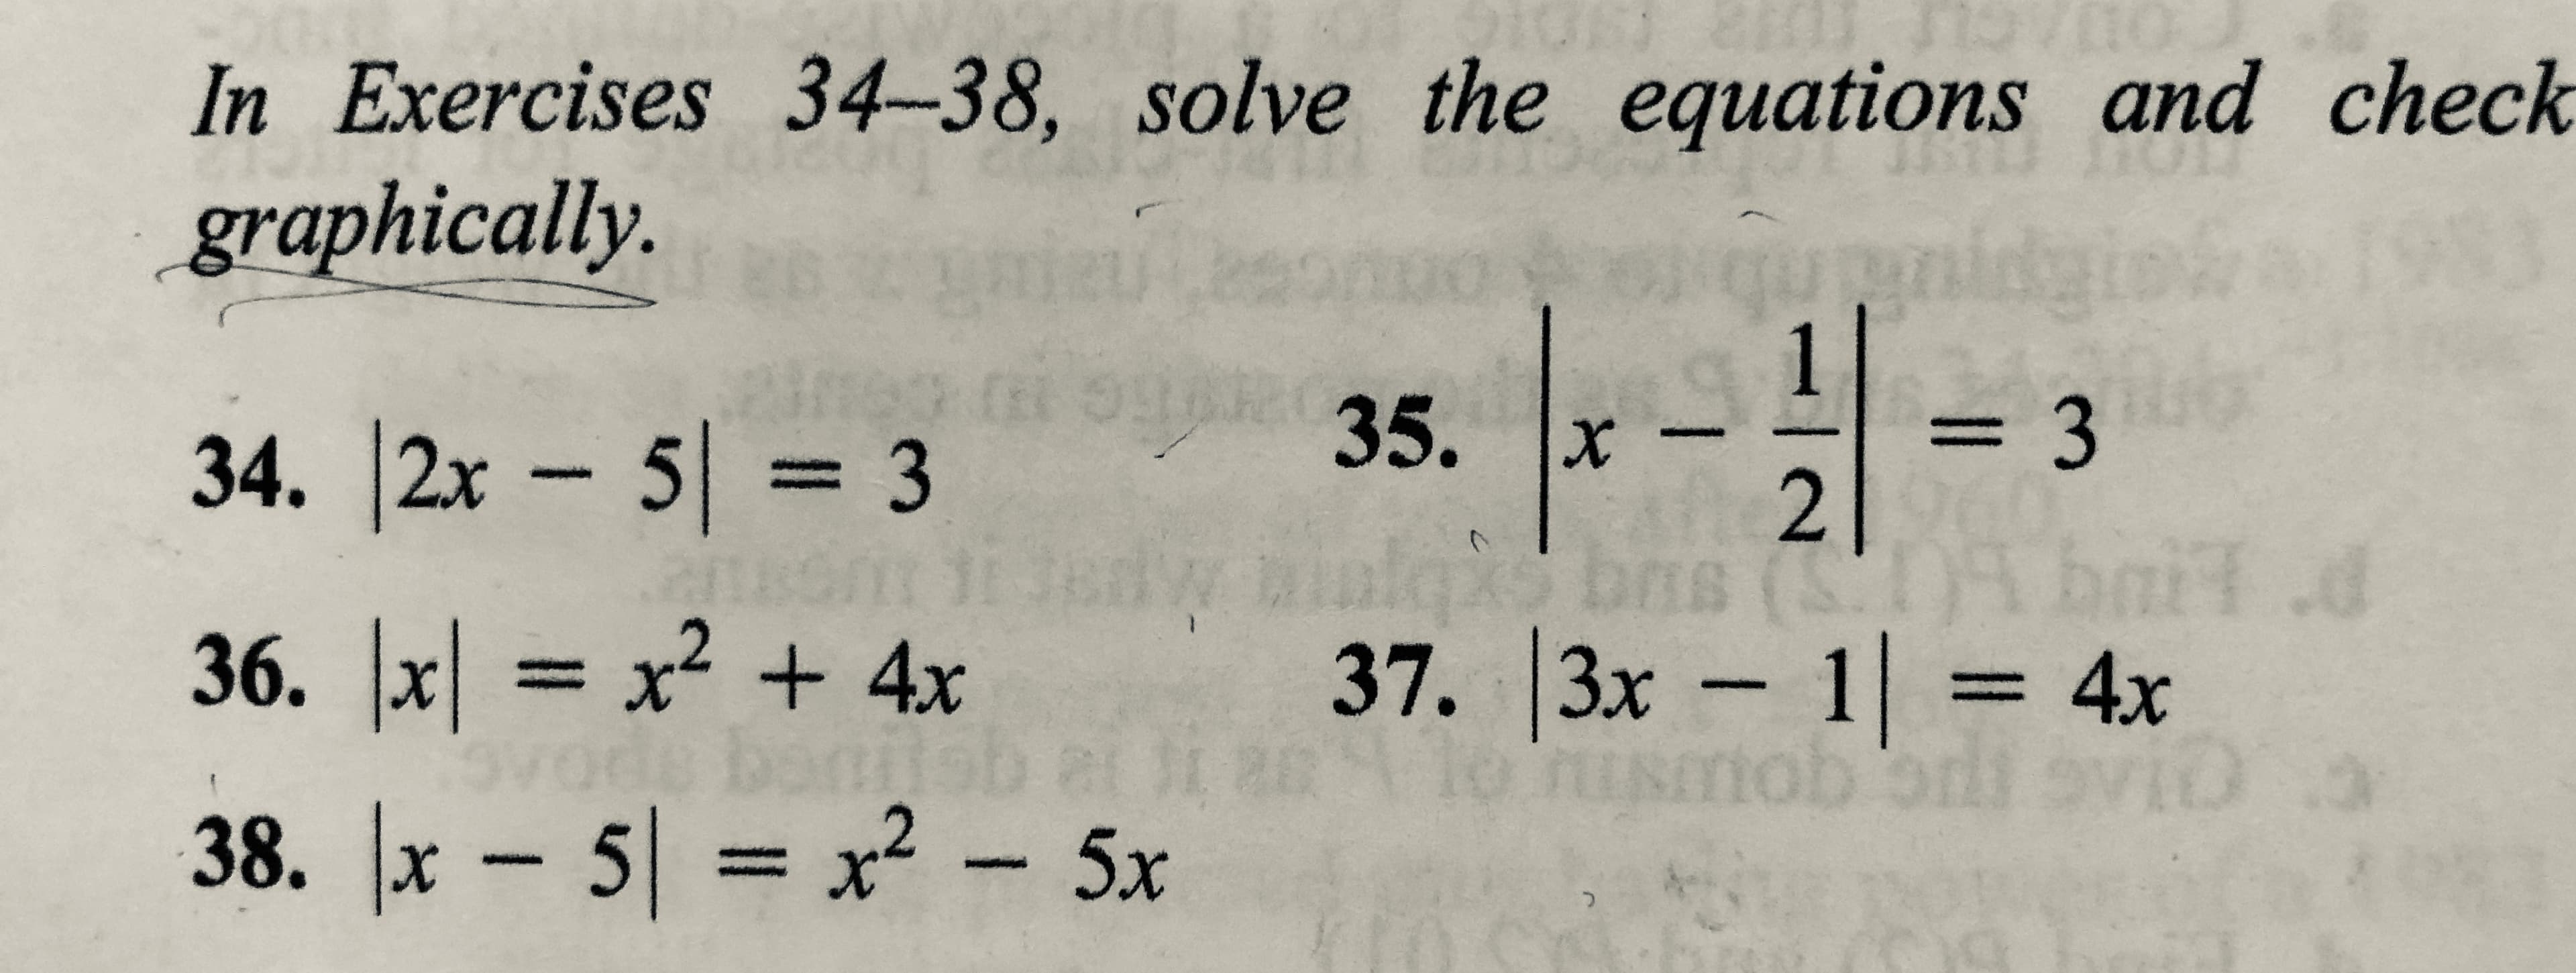 In Exercises 34–38, solve the equations and check
graphically.
35.
3D3
34. 2x 5 = 3
%3D
36. x = x2 + 4x
37. 3x 1 = 4x
%3|
%3D
38. x- 5 x² - 5x
